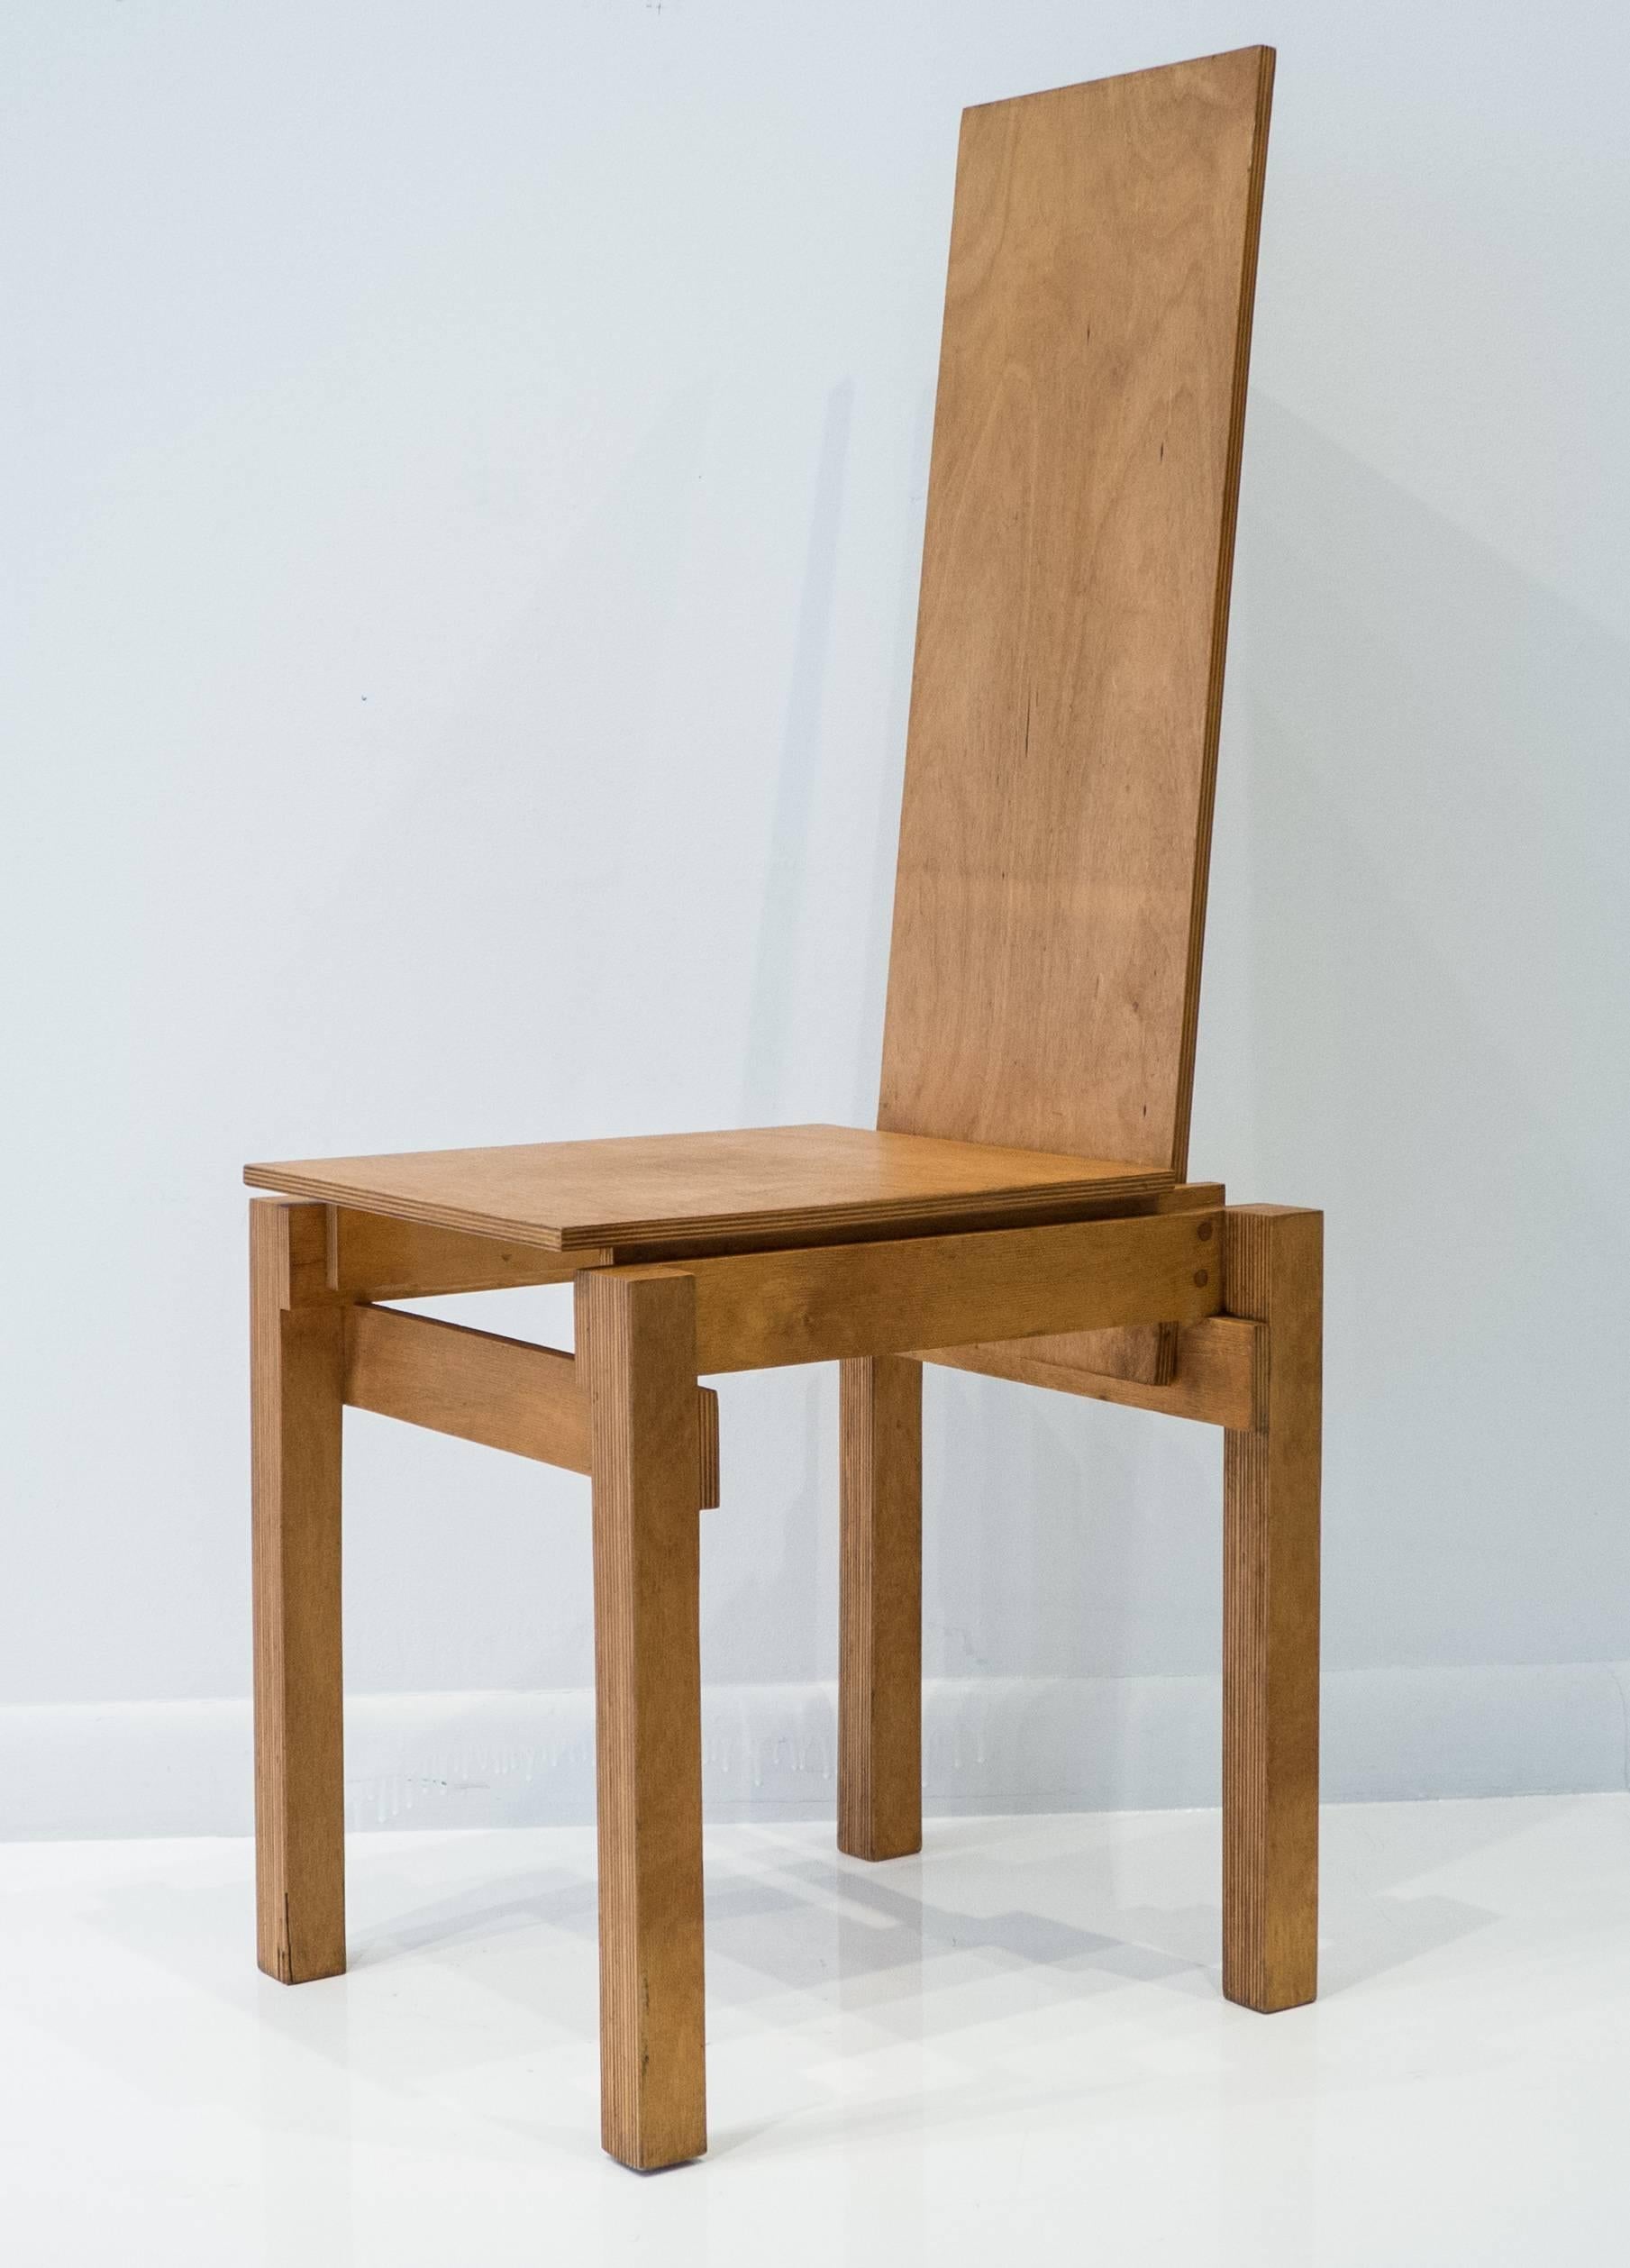 High-back neo-constructivist chair composed of multiple planes of cut and laminated birch plywood, with mortise and tenon joinery attaching the side rails to the seat back. A craft studio homage to Gerrit Rietveld, made circa 1970s, likely in the